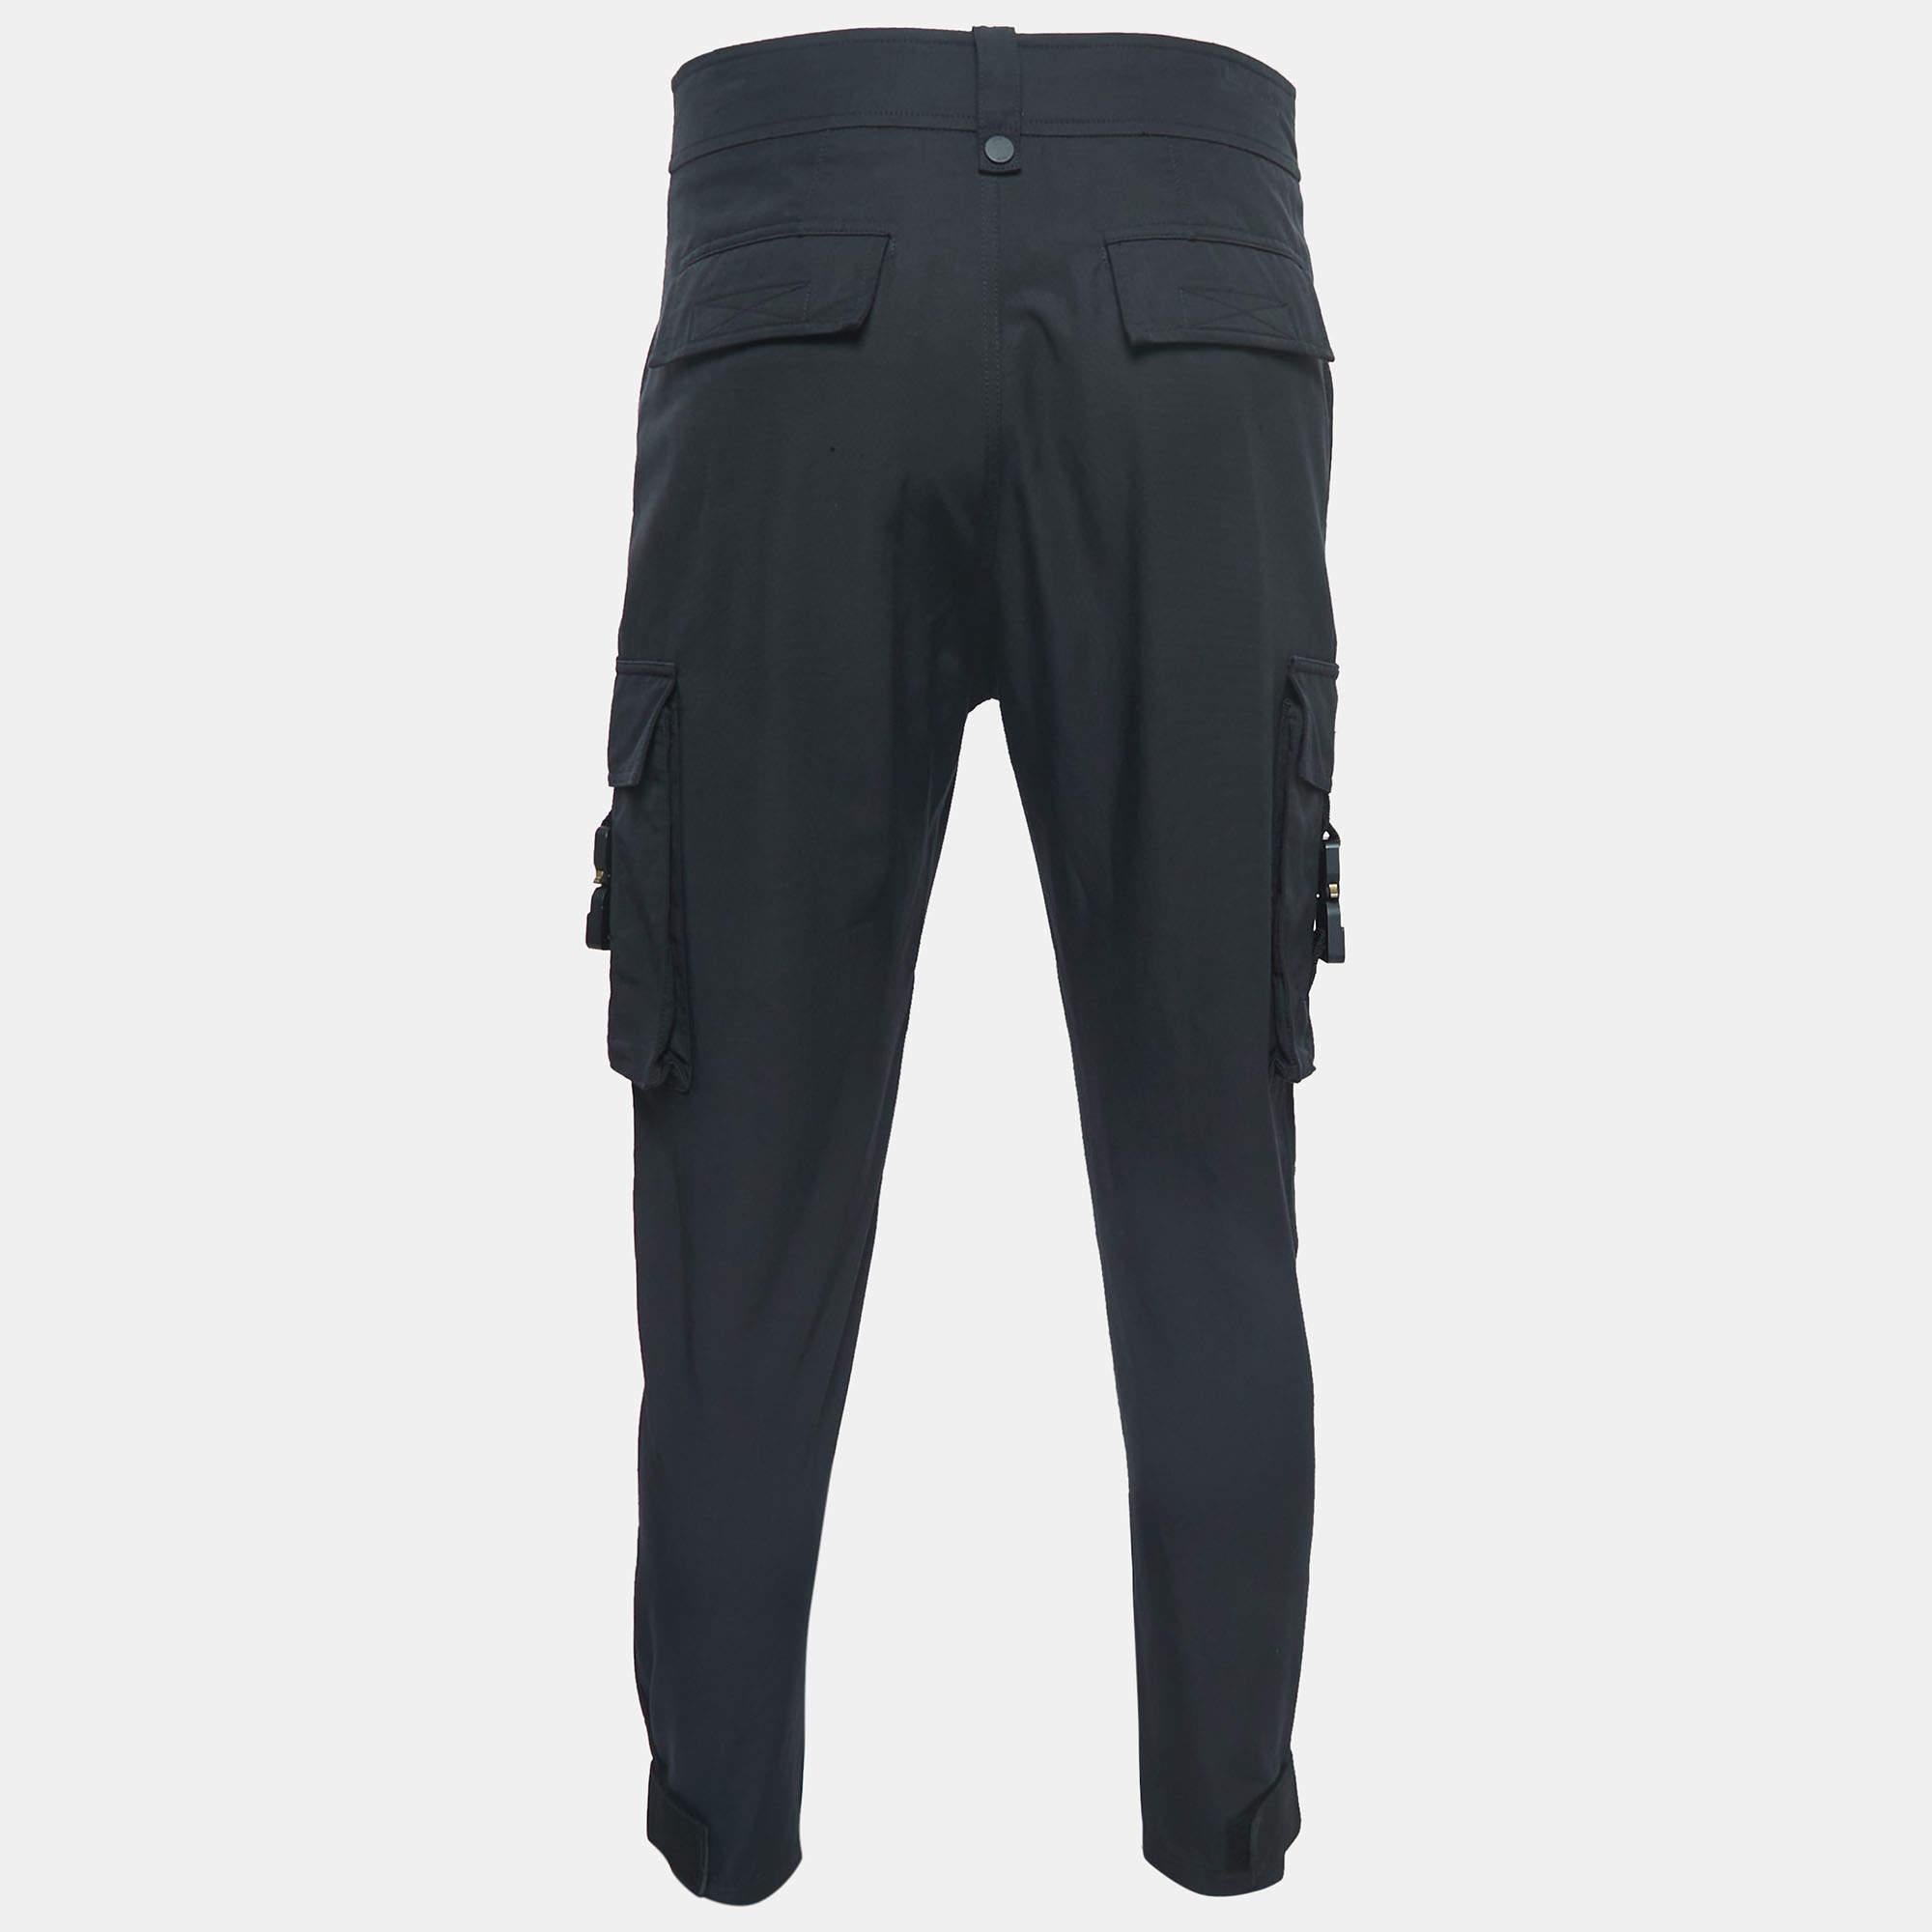 Dior Homme's cargo pants exude urban sophistication. Crafted from high-quality technical cotton, featuring cargo pockets and a distinctive CD buckle, these pants seamlessly blend style and functionality for contemporary and versatile wardrobe